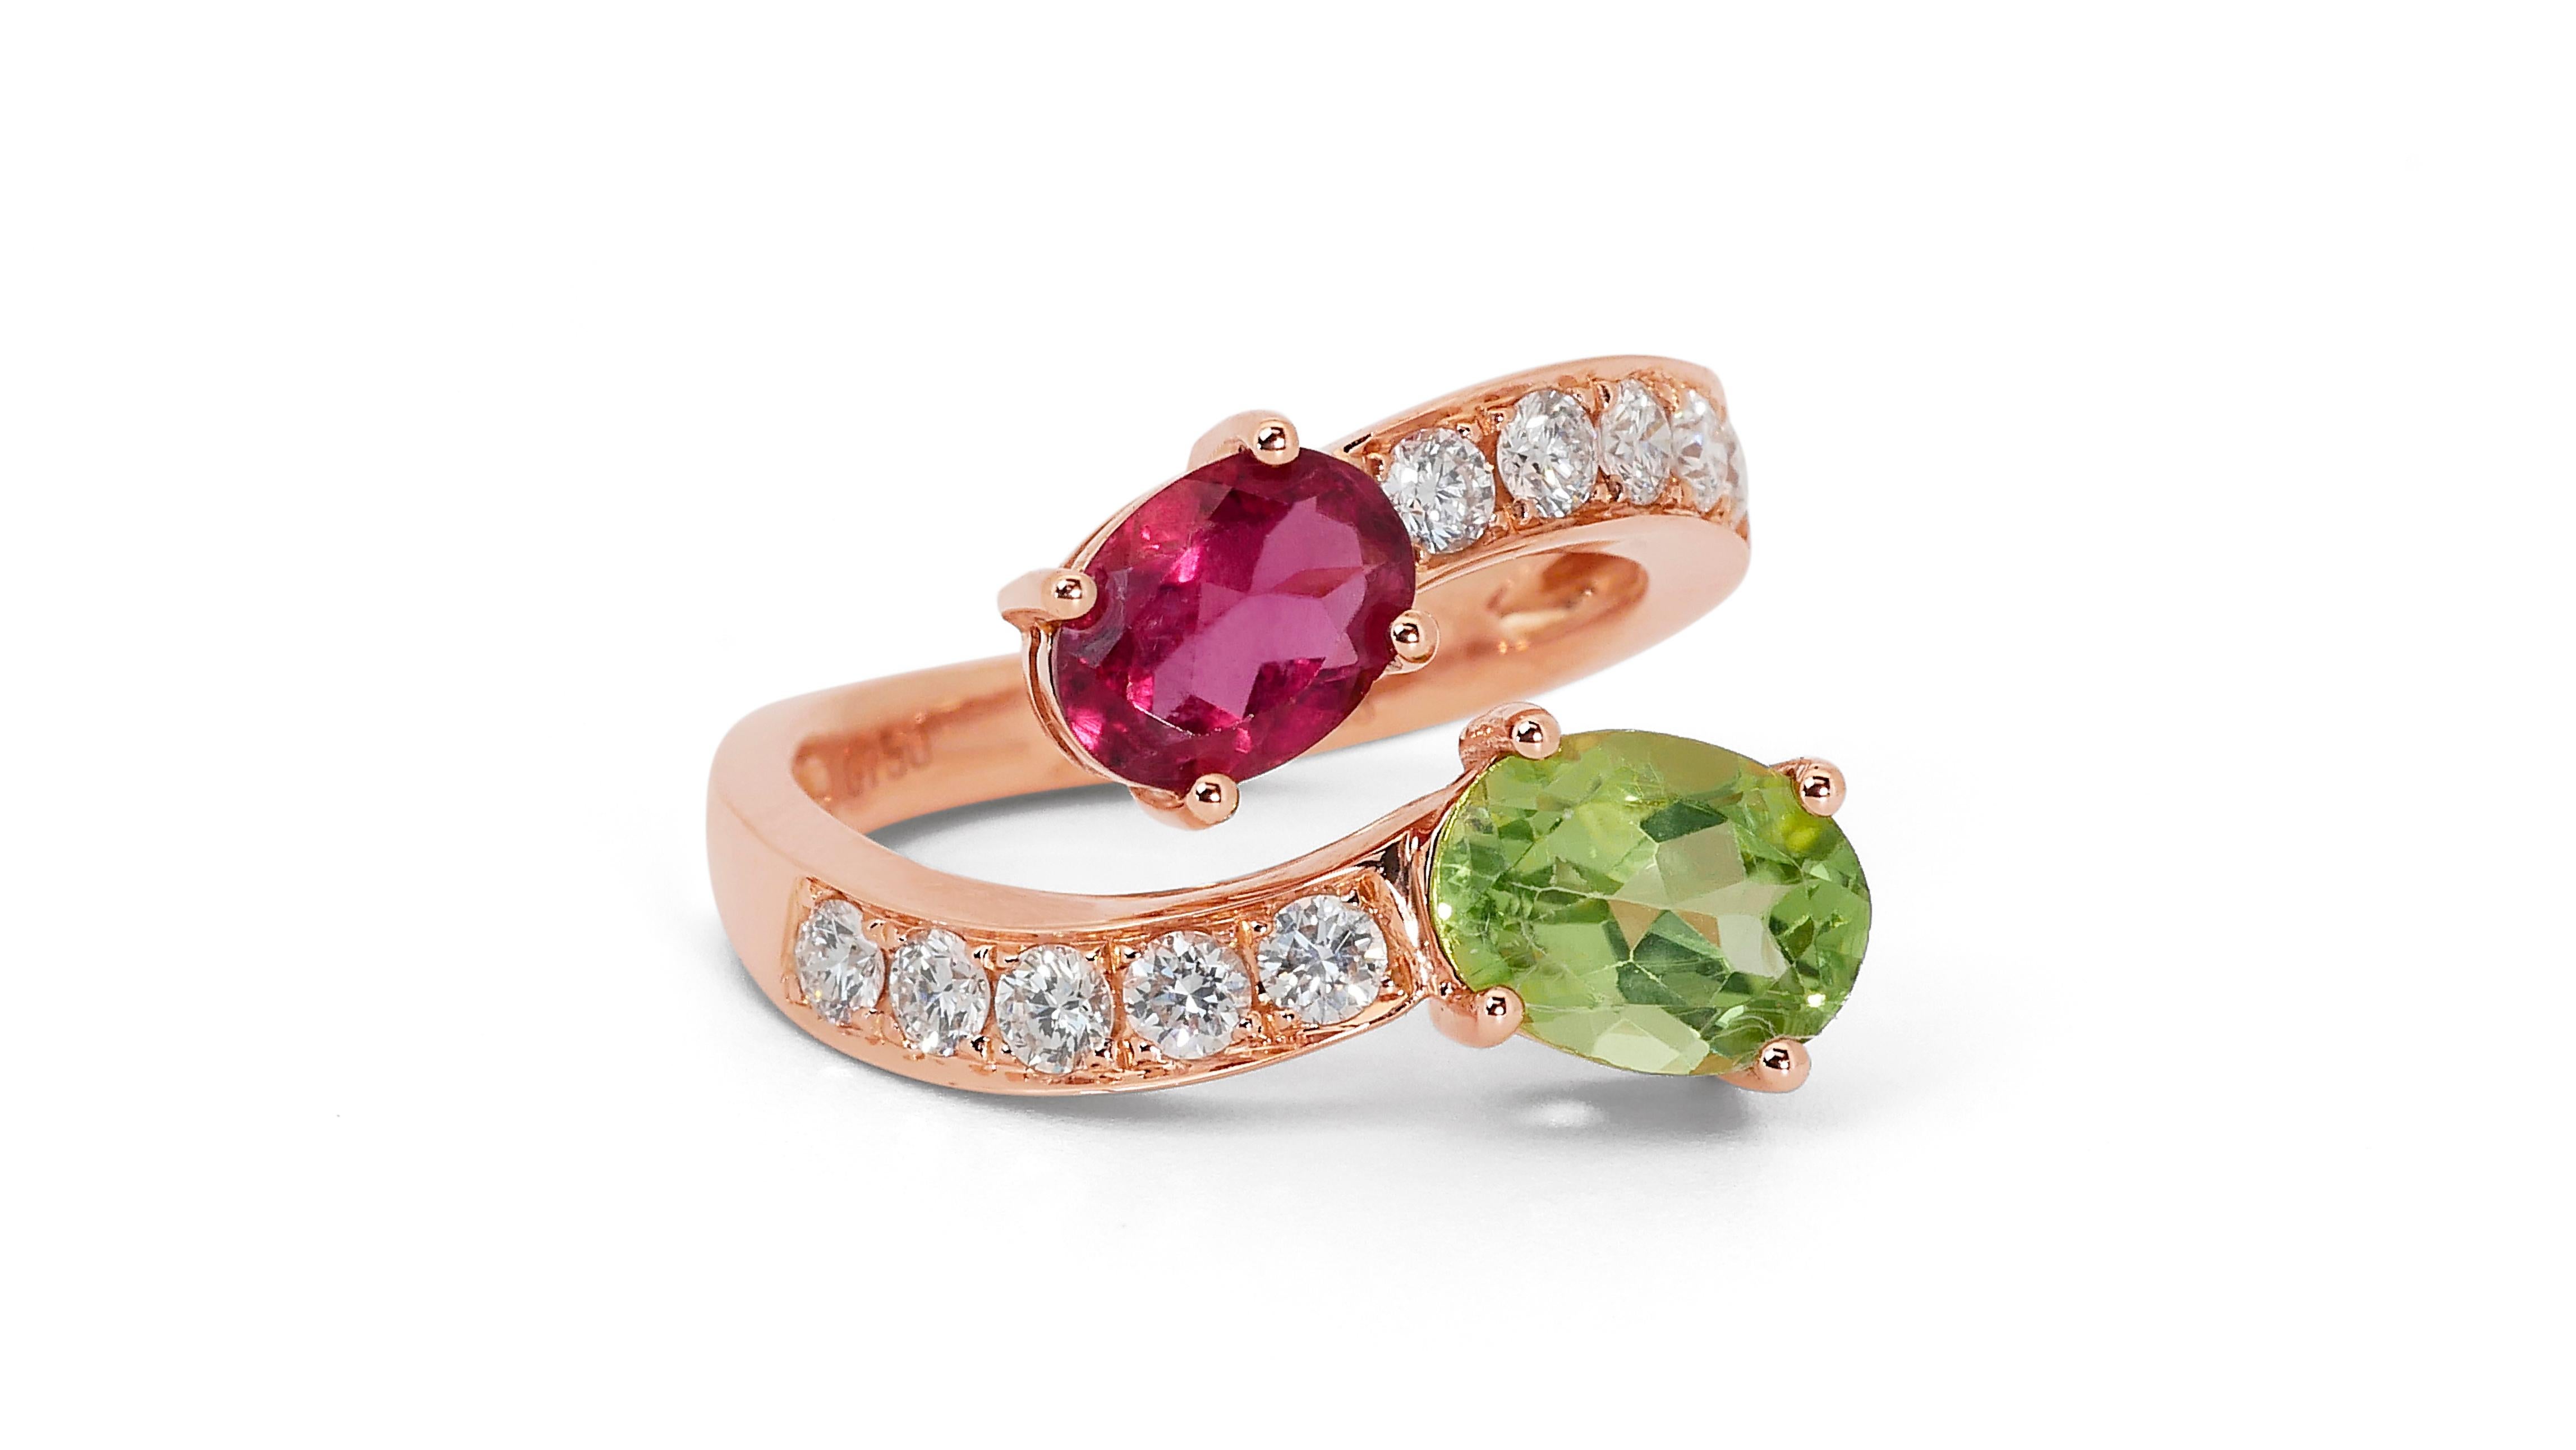 A one-of-a-kind open ring with a dazzling 1.26-carat oval mixed-cut natural peridot. It has 1.12 carats of tourmaline and diamond side stones, adding more to its elegance. The jewelry is made of 18K Pink with a high-quality polish. It comes with an